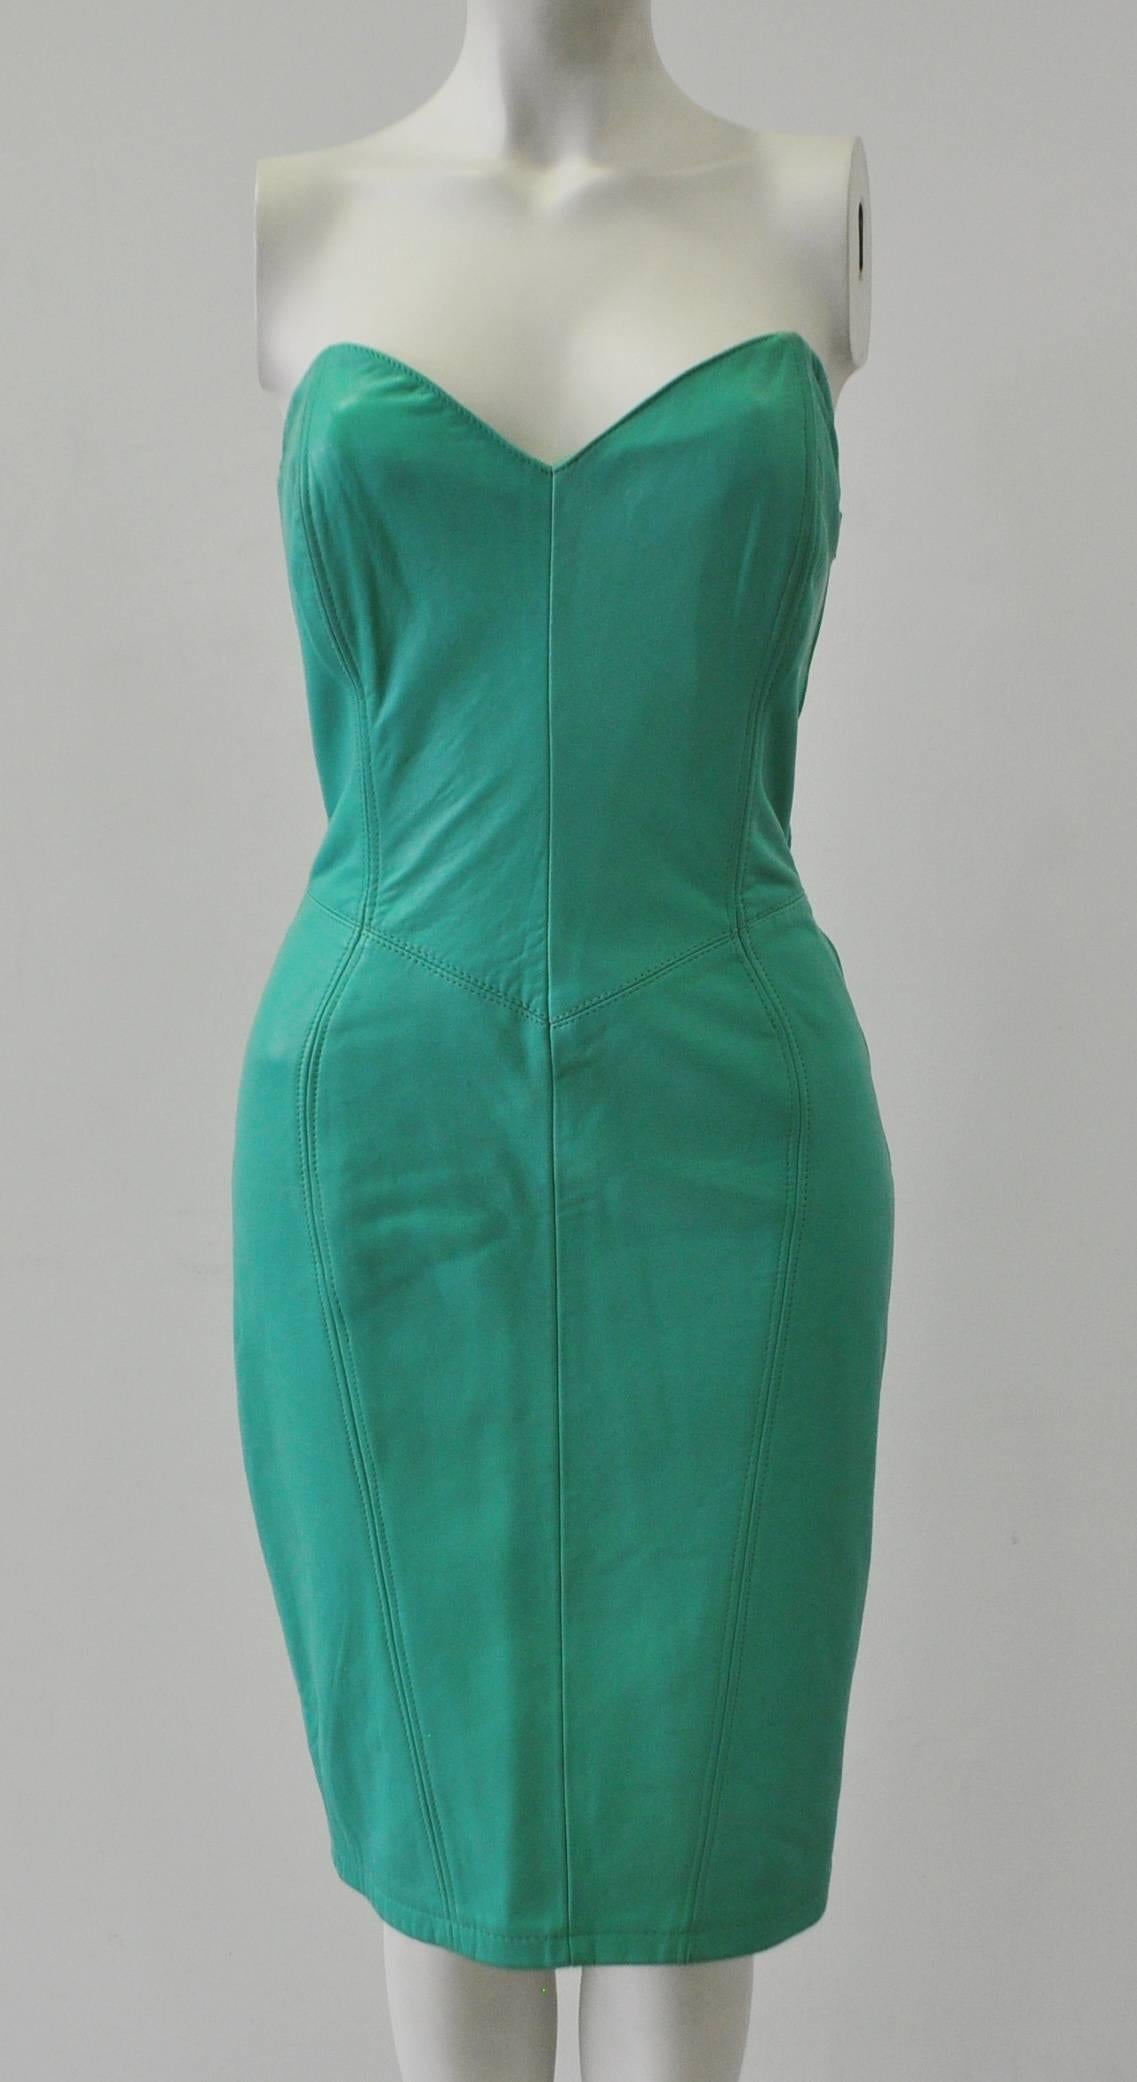 Stunning Michael Hoban for North Beach Leather Lace-Up Bodice Mint Green Strapless Leather Dress